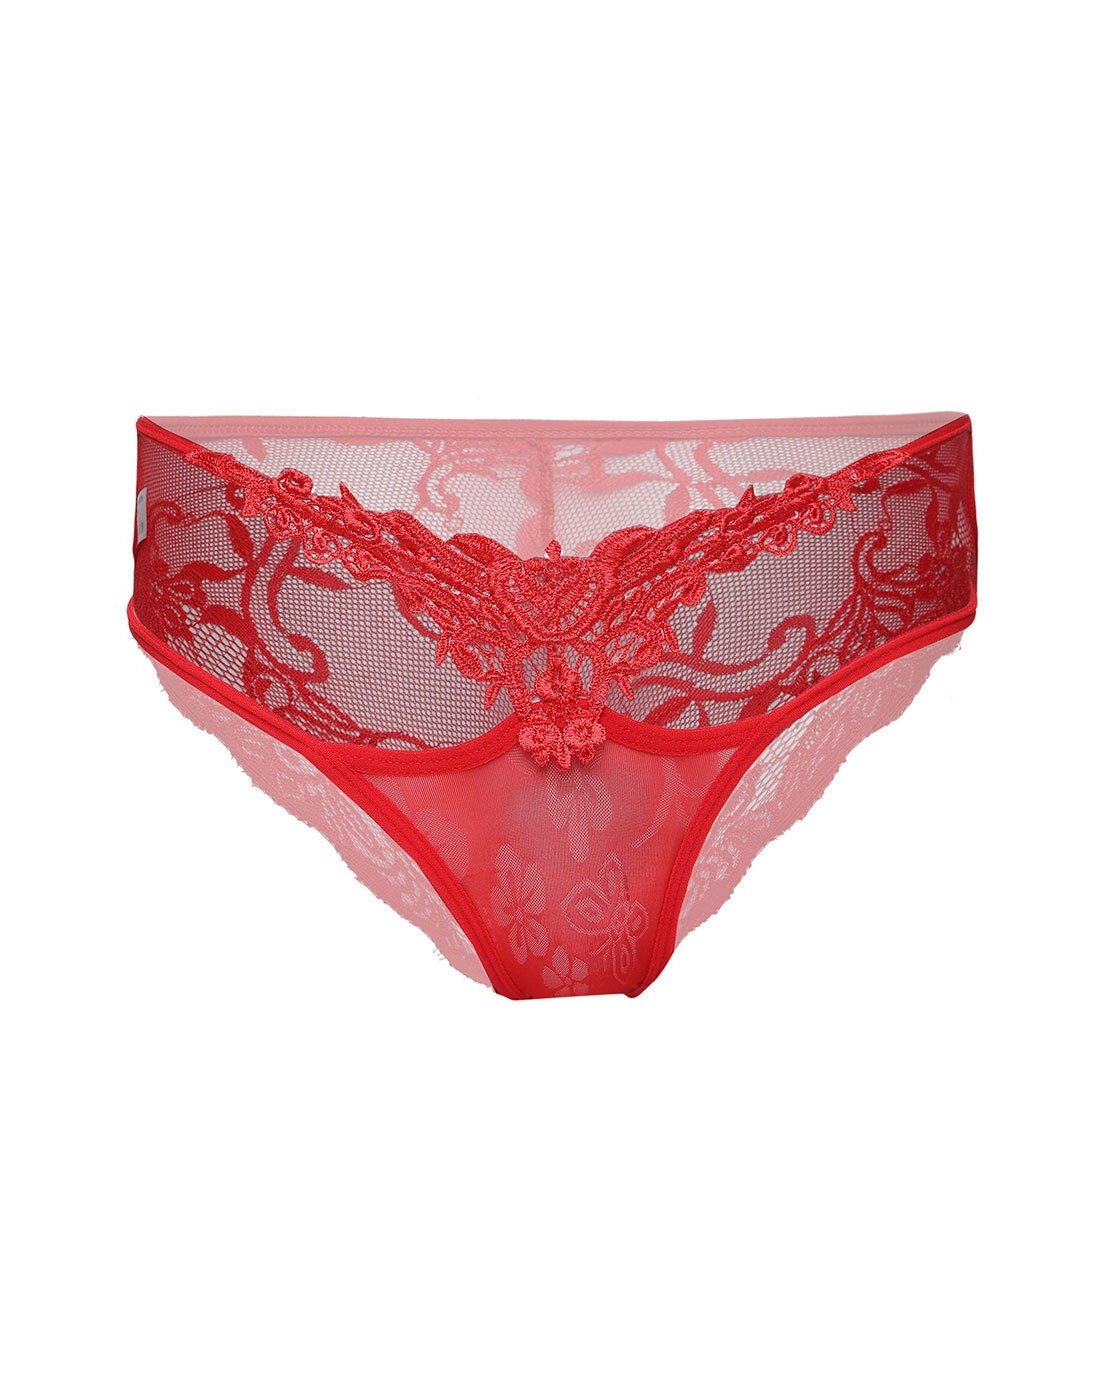 Buy Red Panties for Women by DealSeven Fashion Online